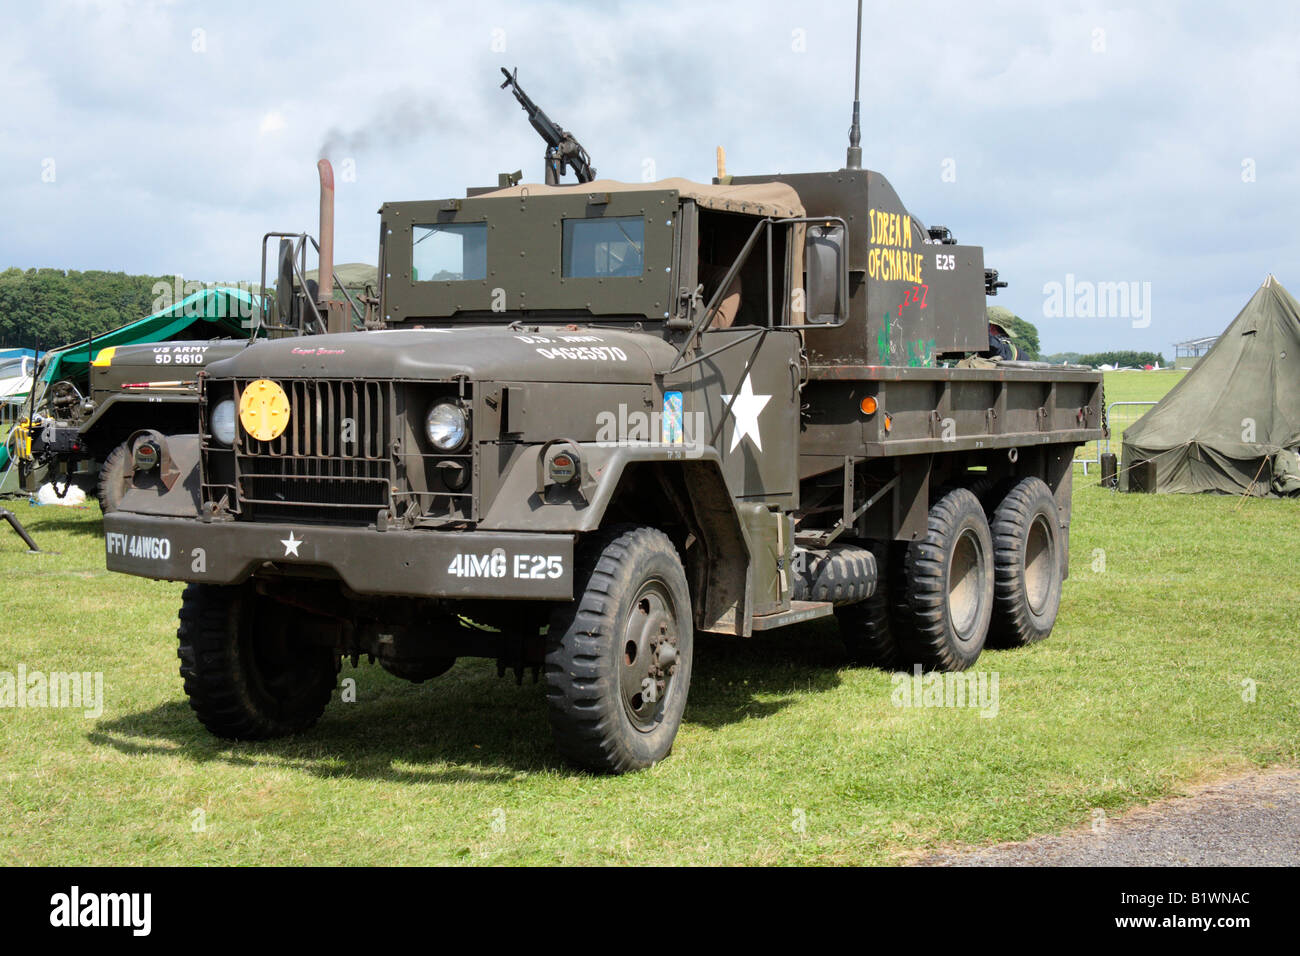 WWII military 6x6 truck with anti-aircraft guns Stock Photo - Alamy